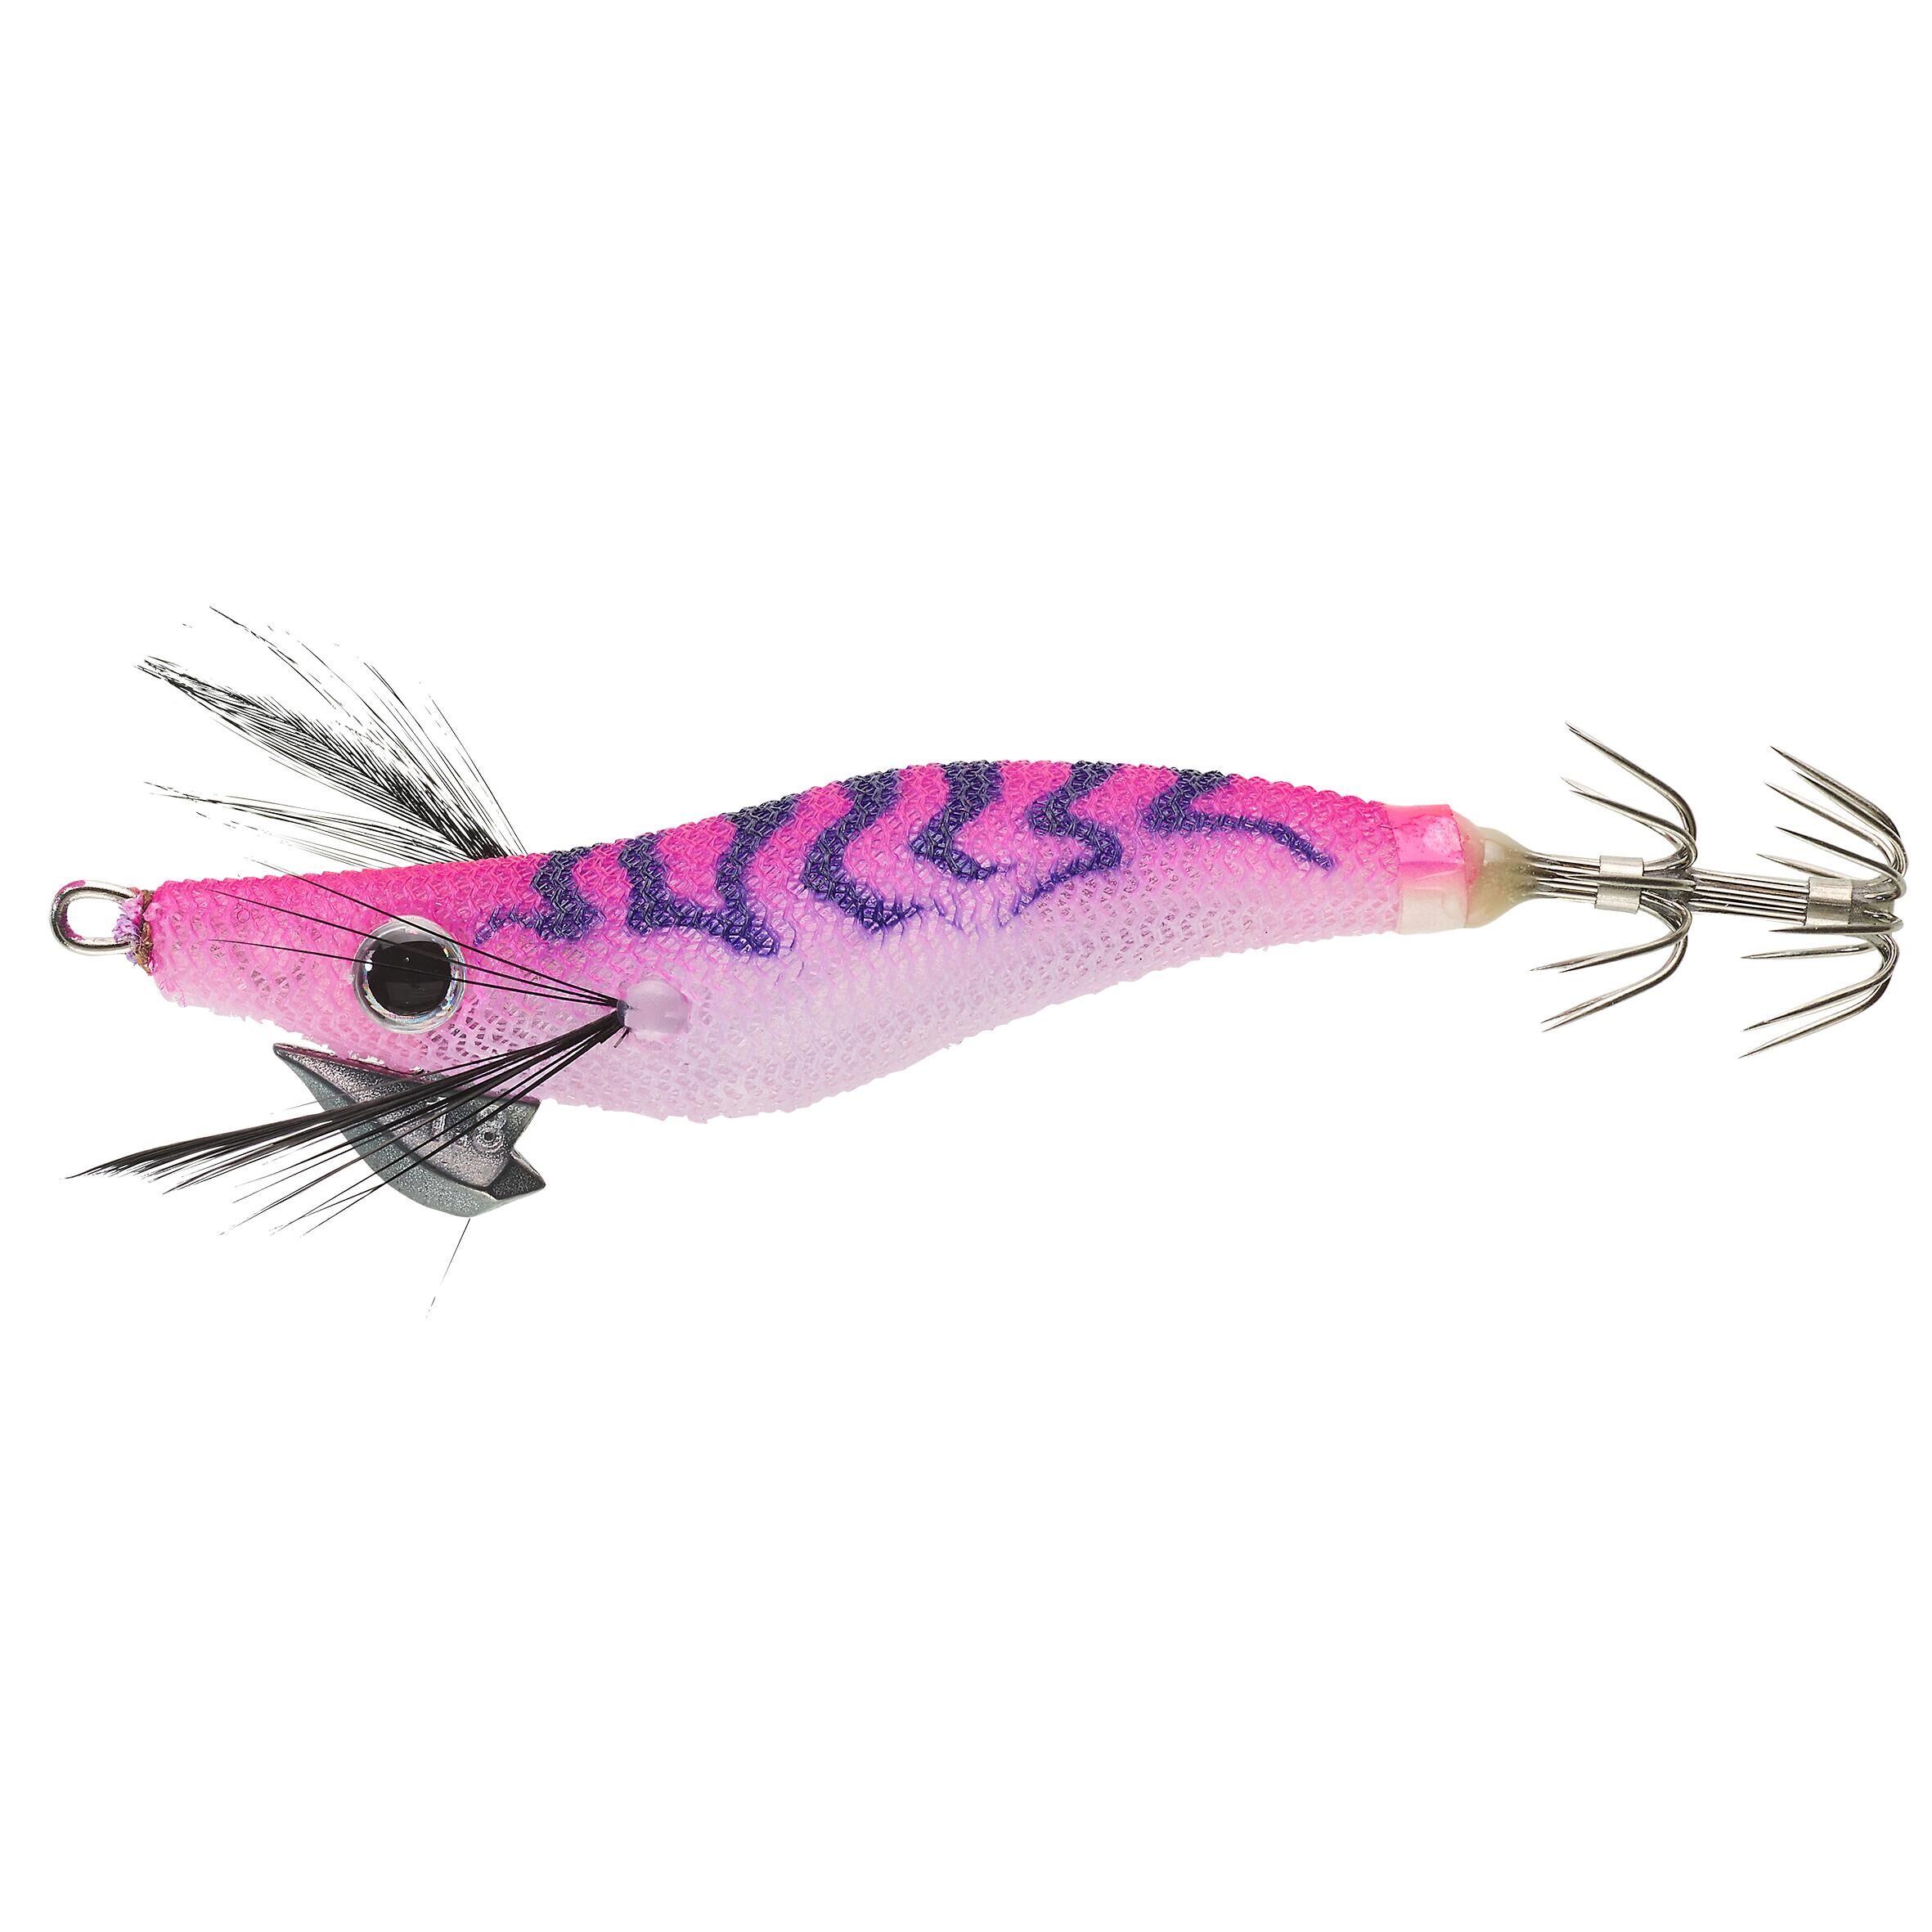 CAPERLAN Sea fishing for cuttlefish and squid sinking jig EBI S 1.8/85 Pink